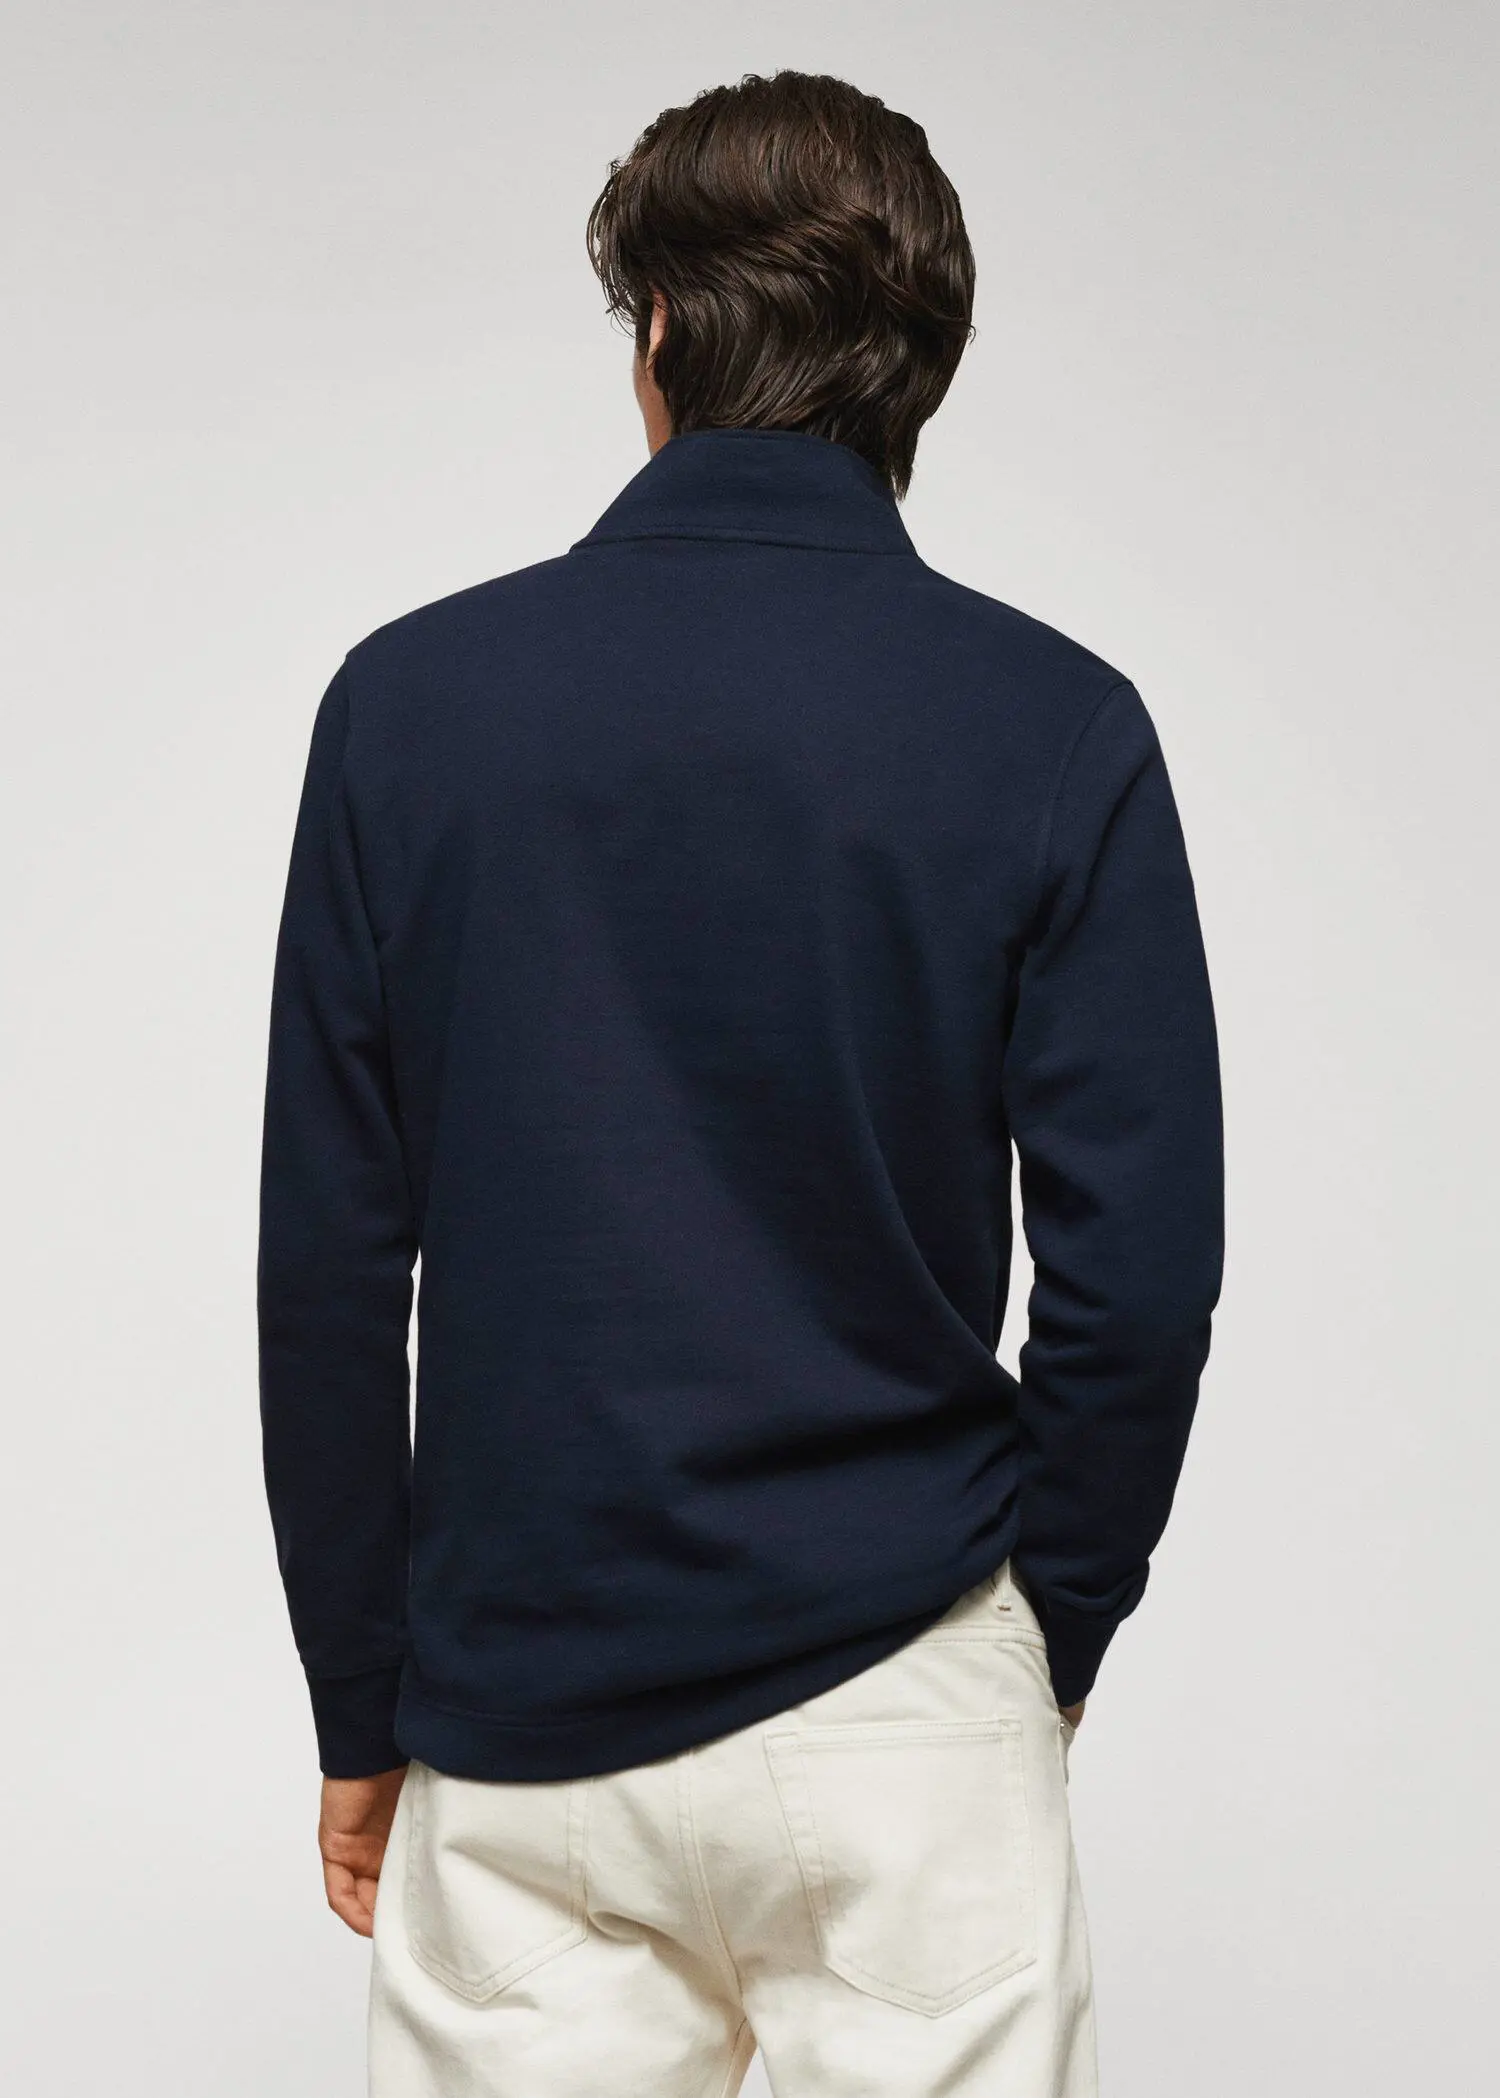 Mango Cotton sweatshirt with zip neck. a man wearing a navy blue jacket and white pants. 